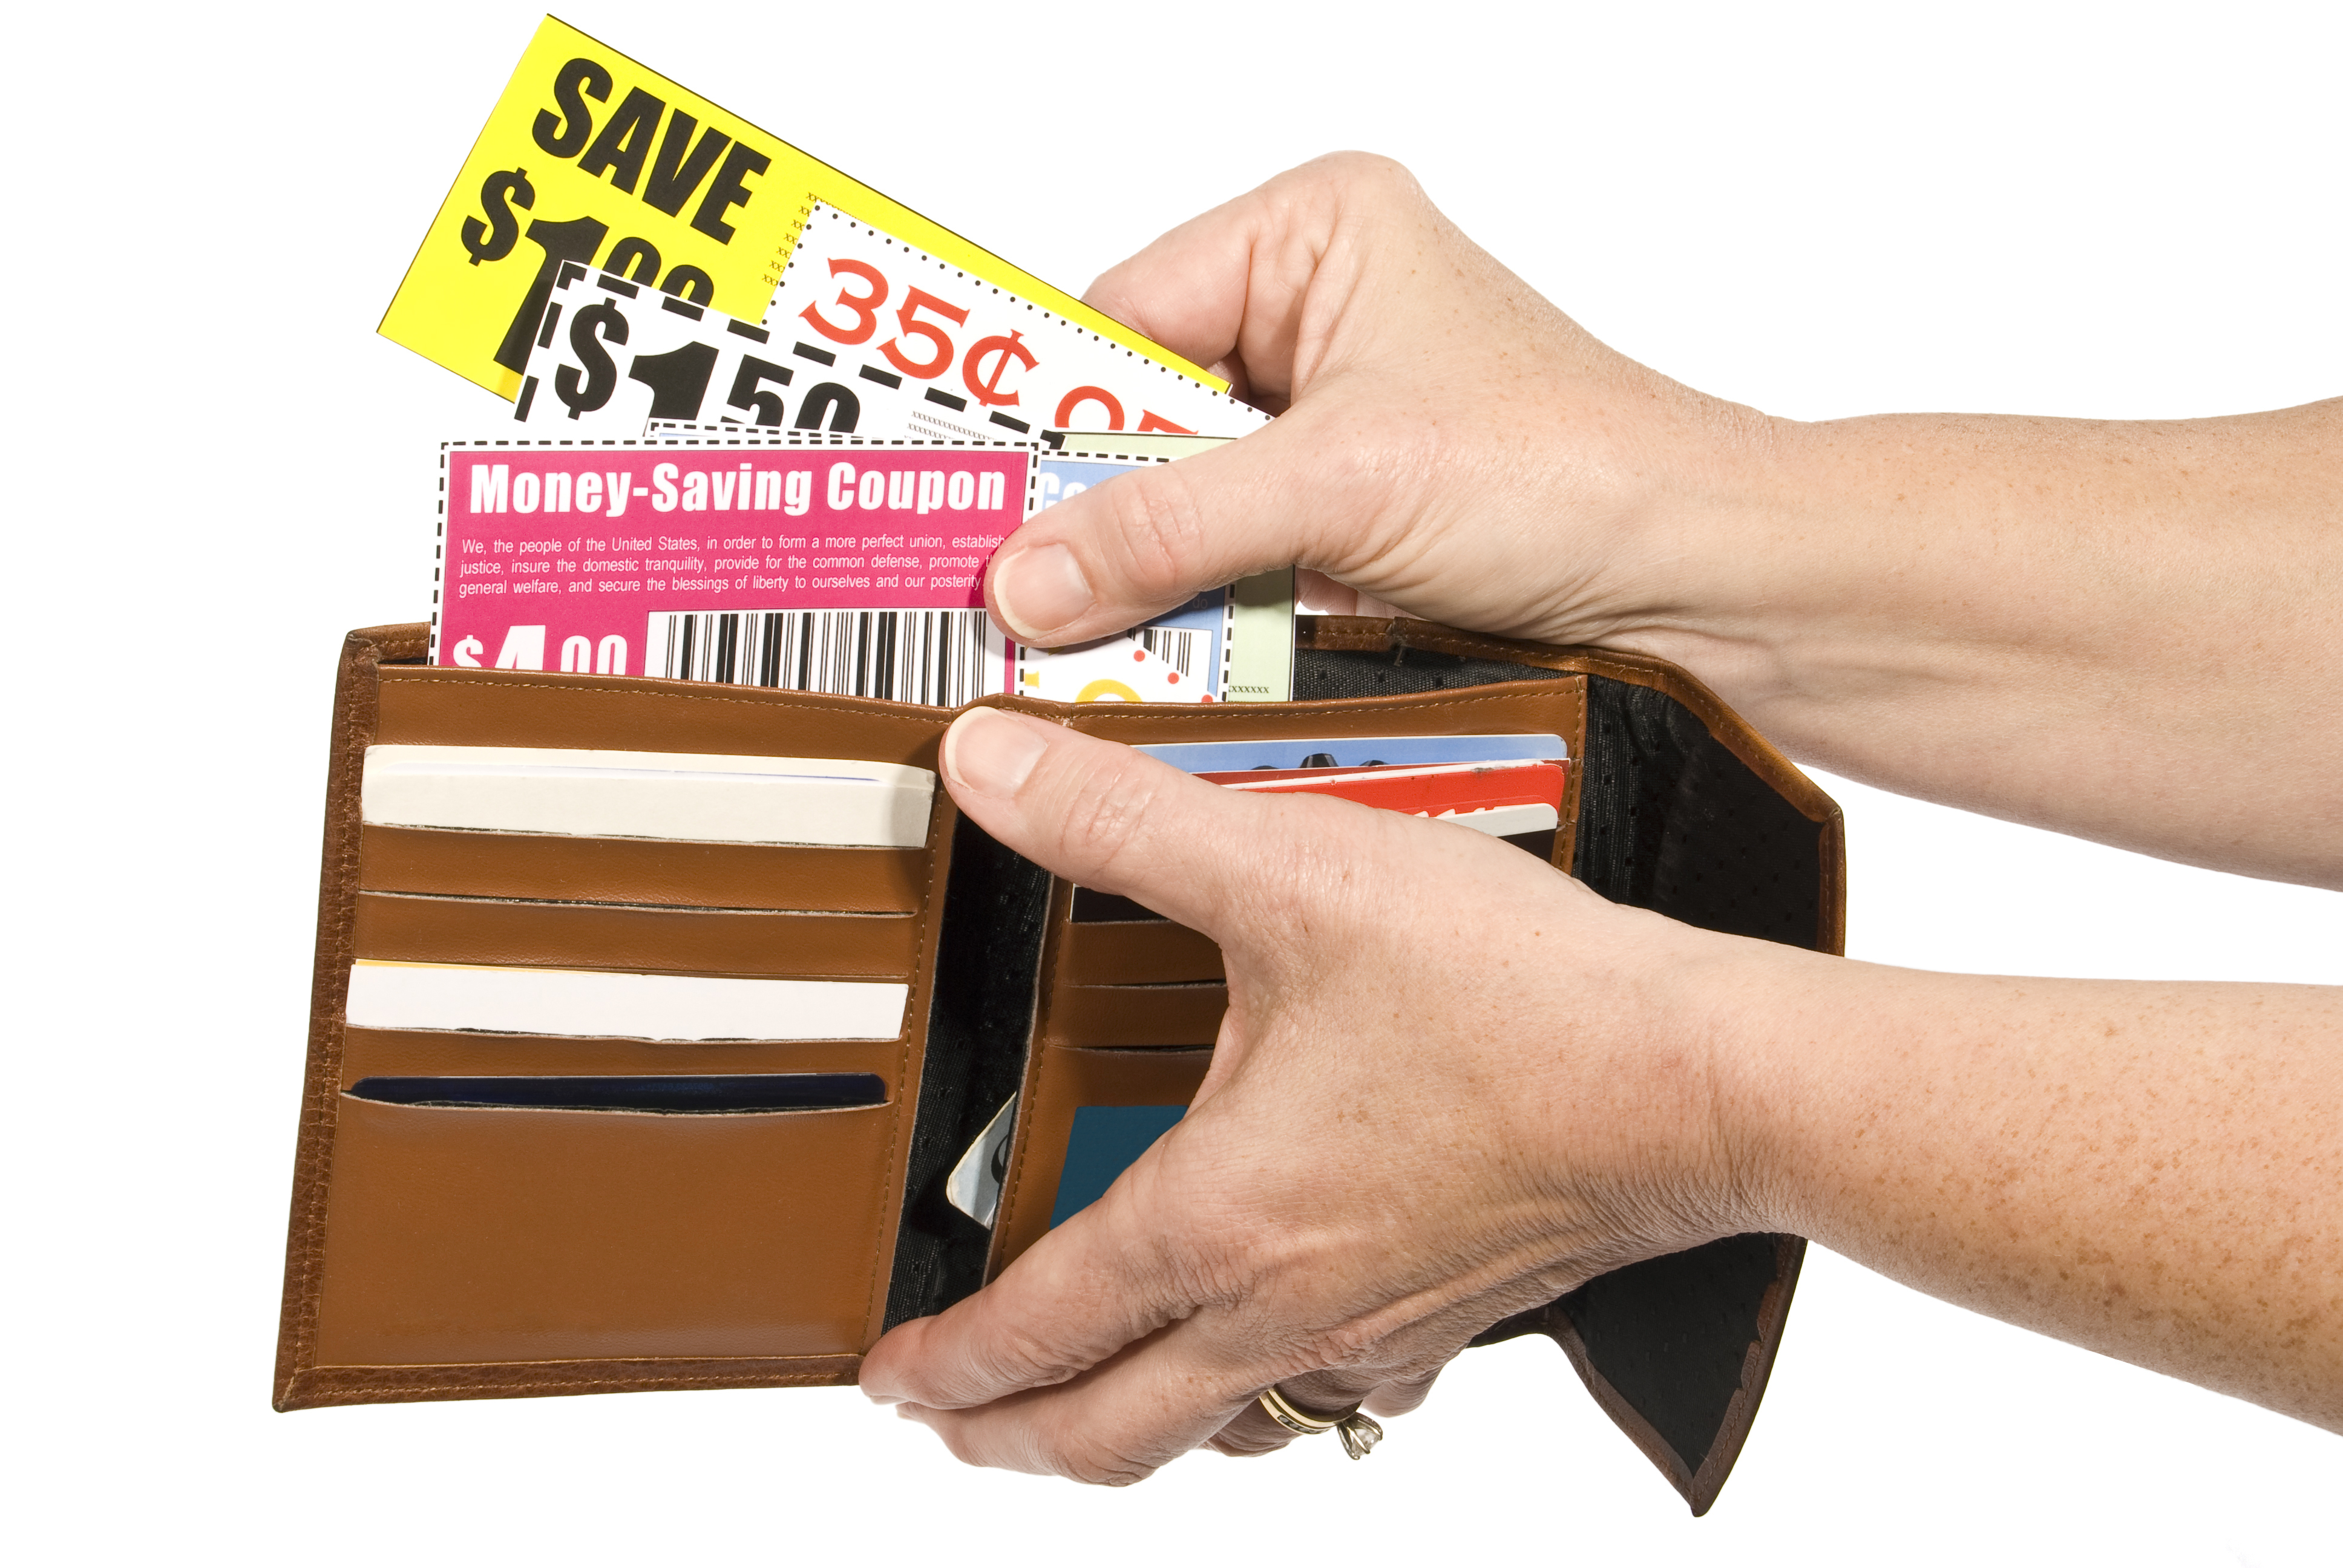 Hands holding a wallet with coupons